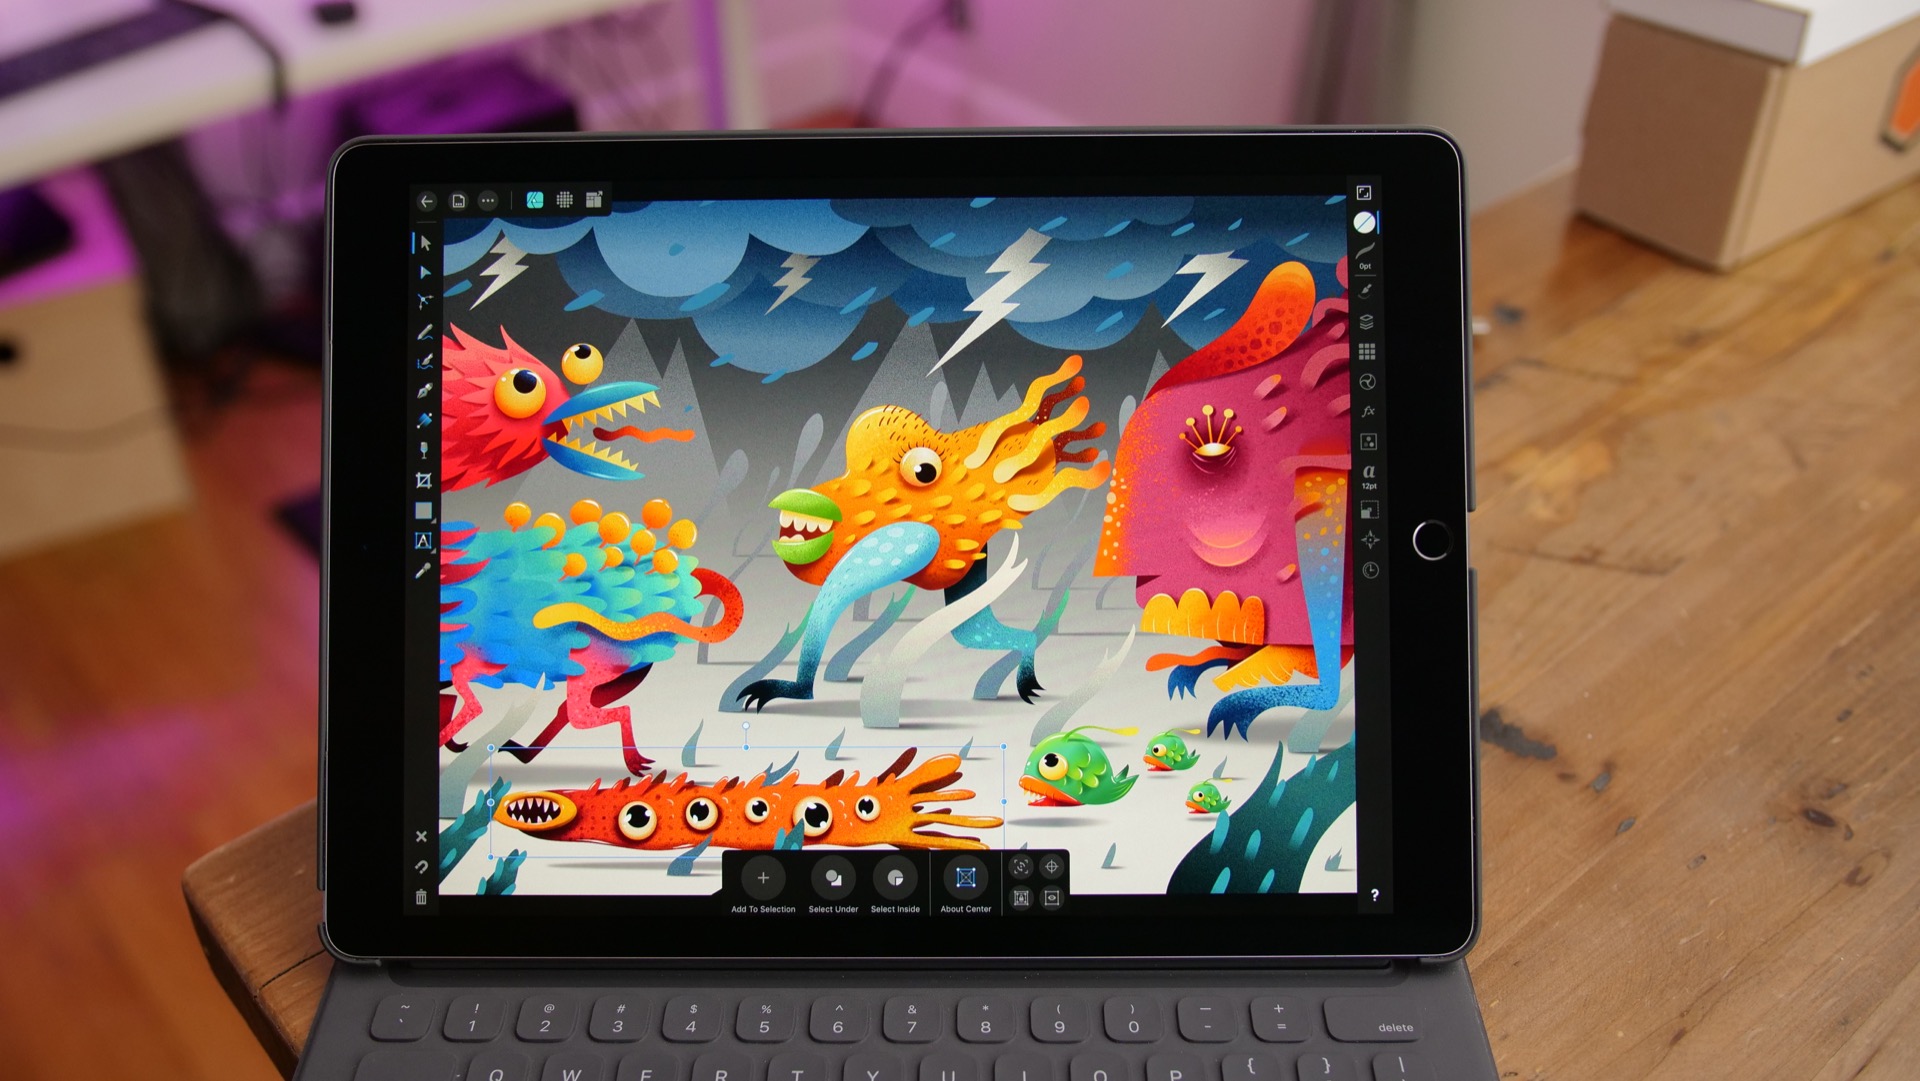 Professional Illustrator App Affinity Designer Now Available On Ipad For Just 13 99 9to5mac